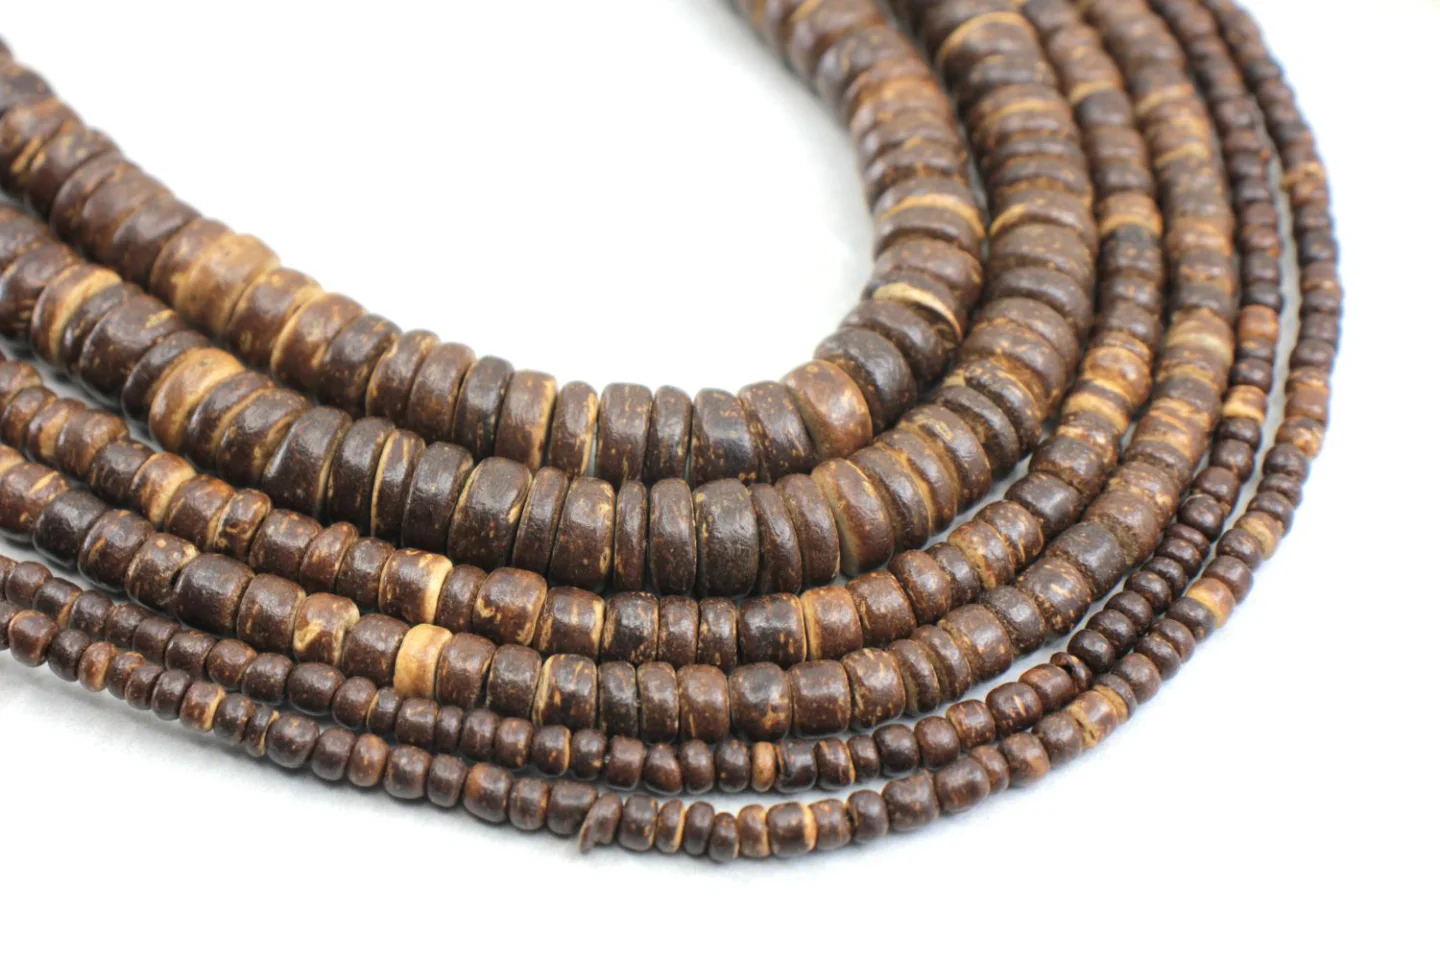 5mm-natural-coconut-beads.